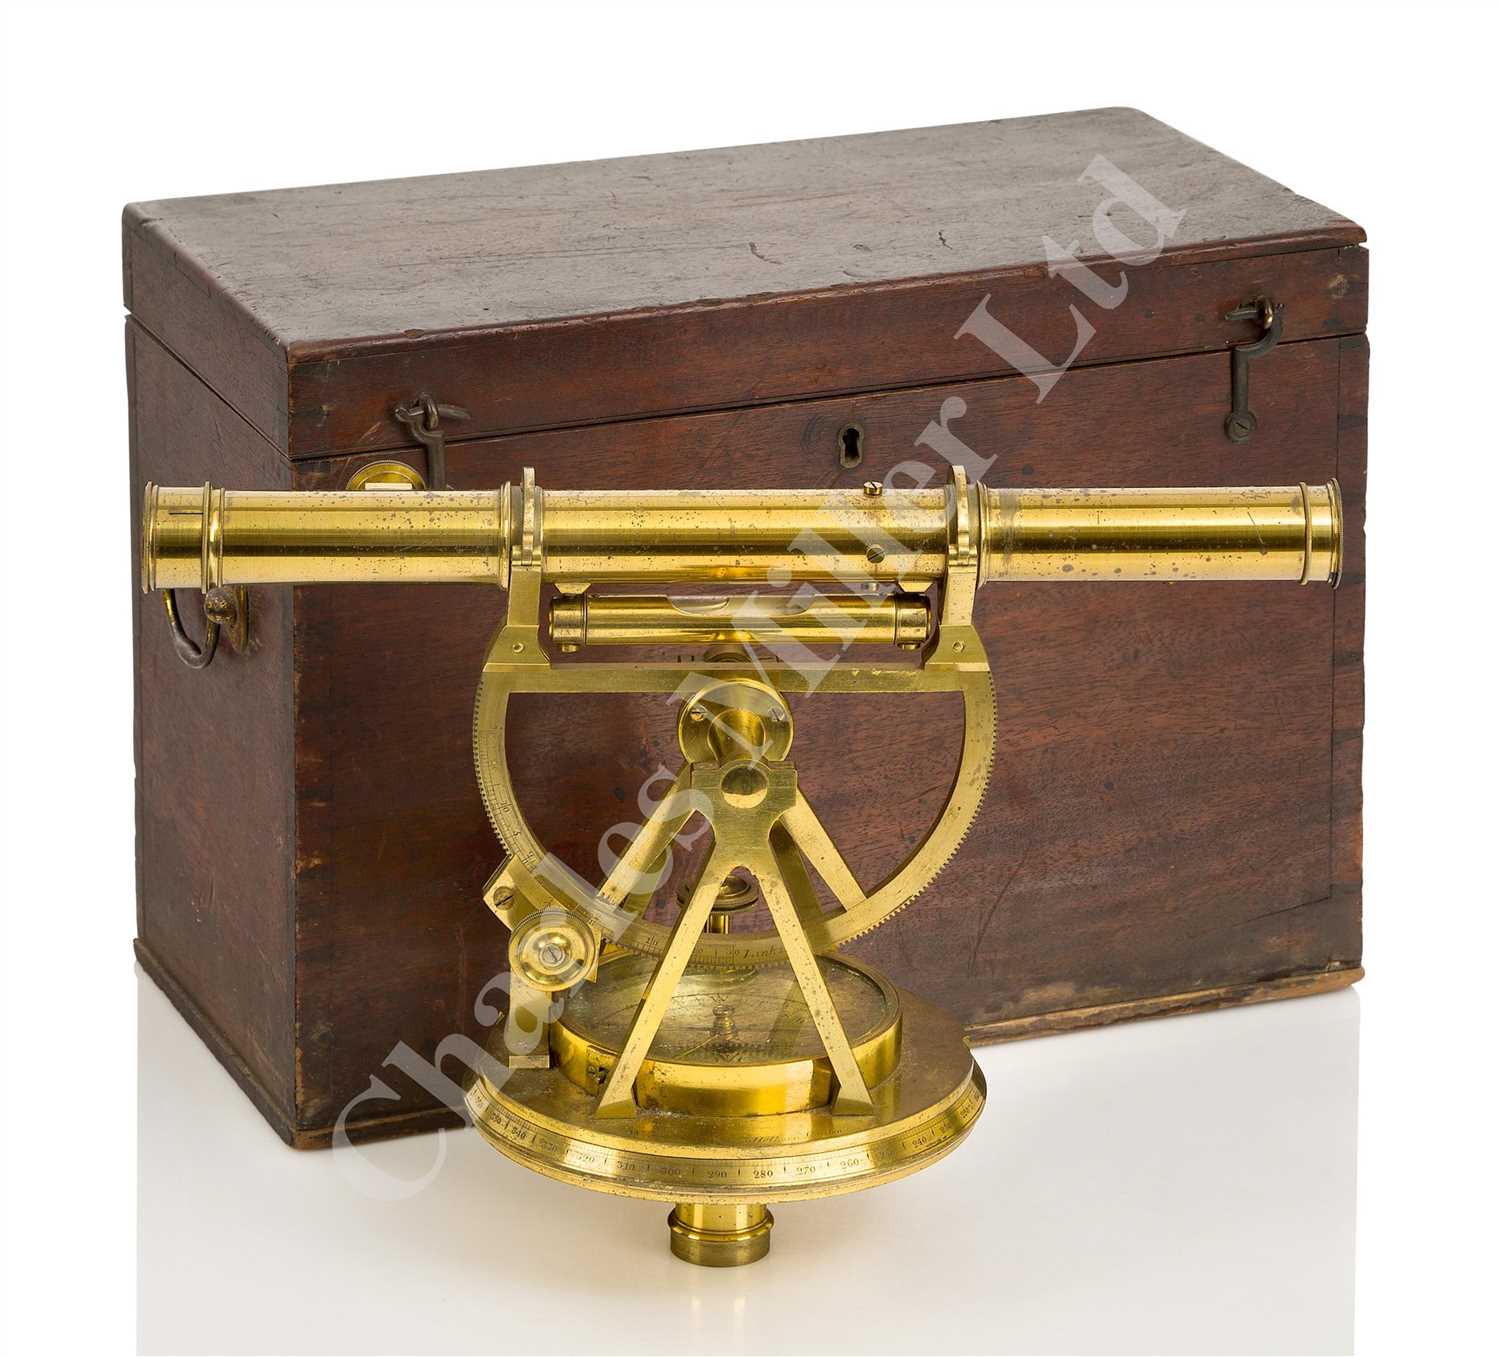 Lot 274 - A FINE AND ORIGINAL LATE 18TH CENTURY THEODOLITE BY W. & S. JONES, HOLBORN, LONDON